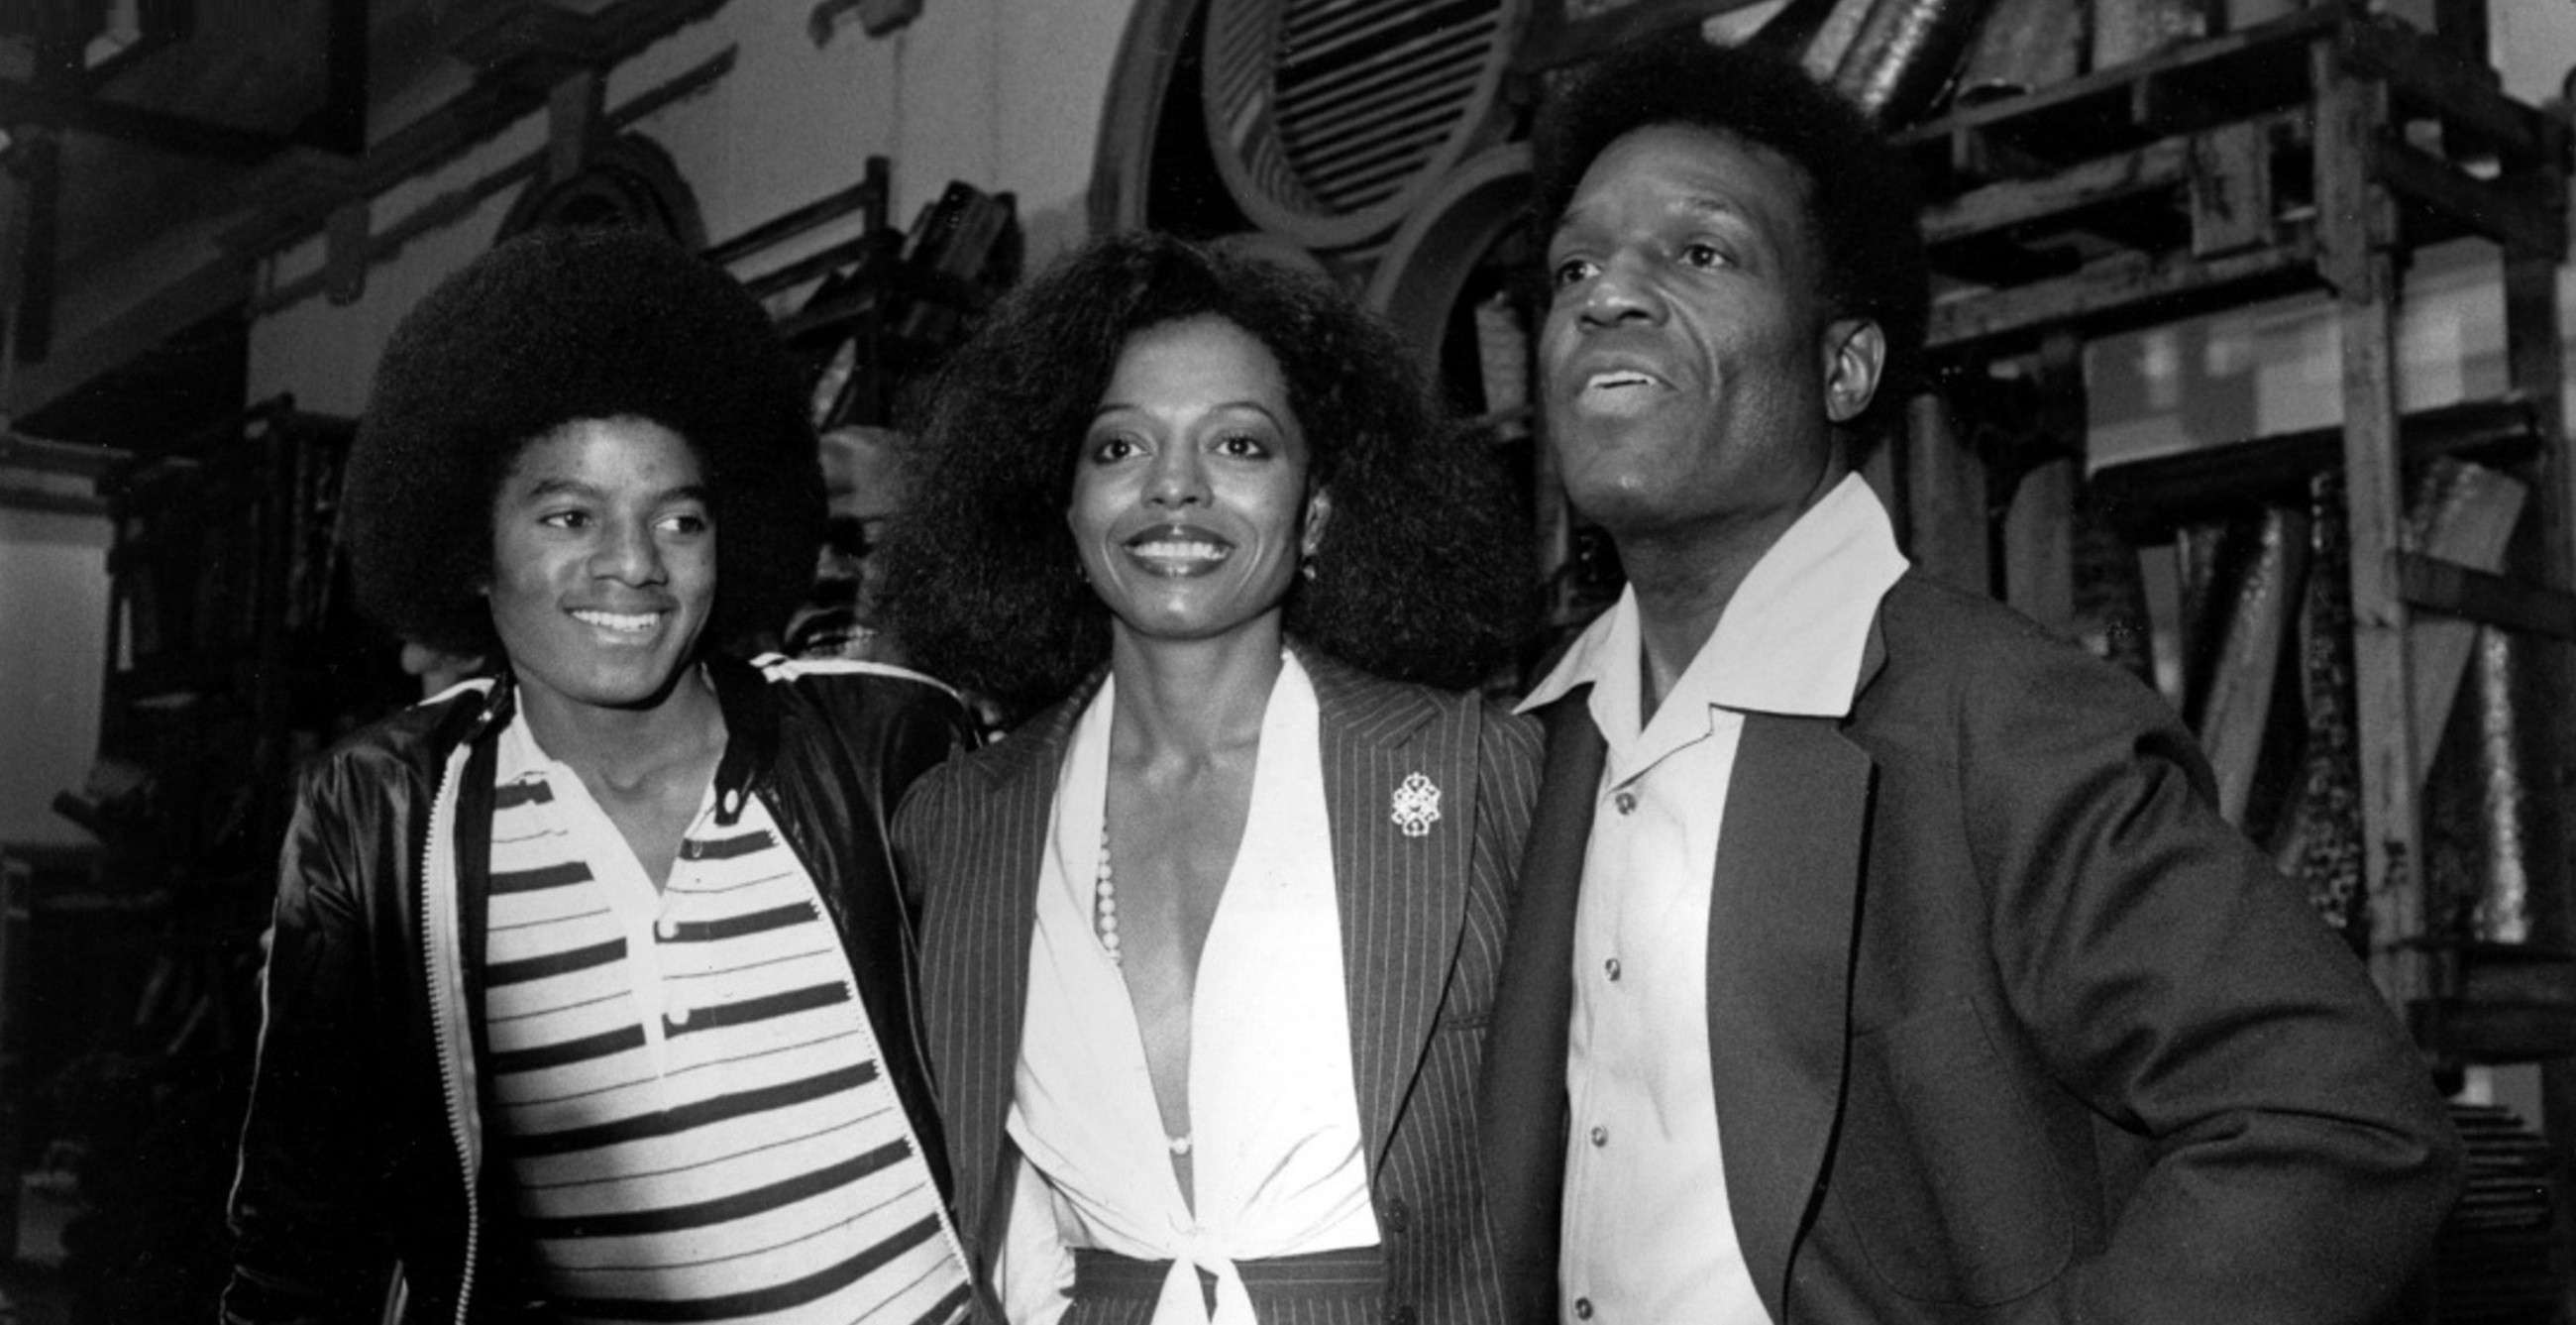 DIVULGAÇÃO - The Wiz - Michael Jackson and his The Wiz, Co-Also starring Diana Ross and Russell Nipsy attend a Press Conference for the premiere of the film. Michae38